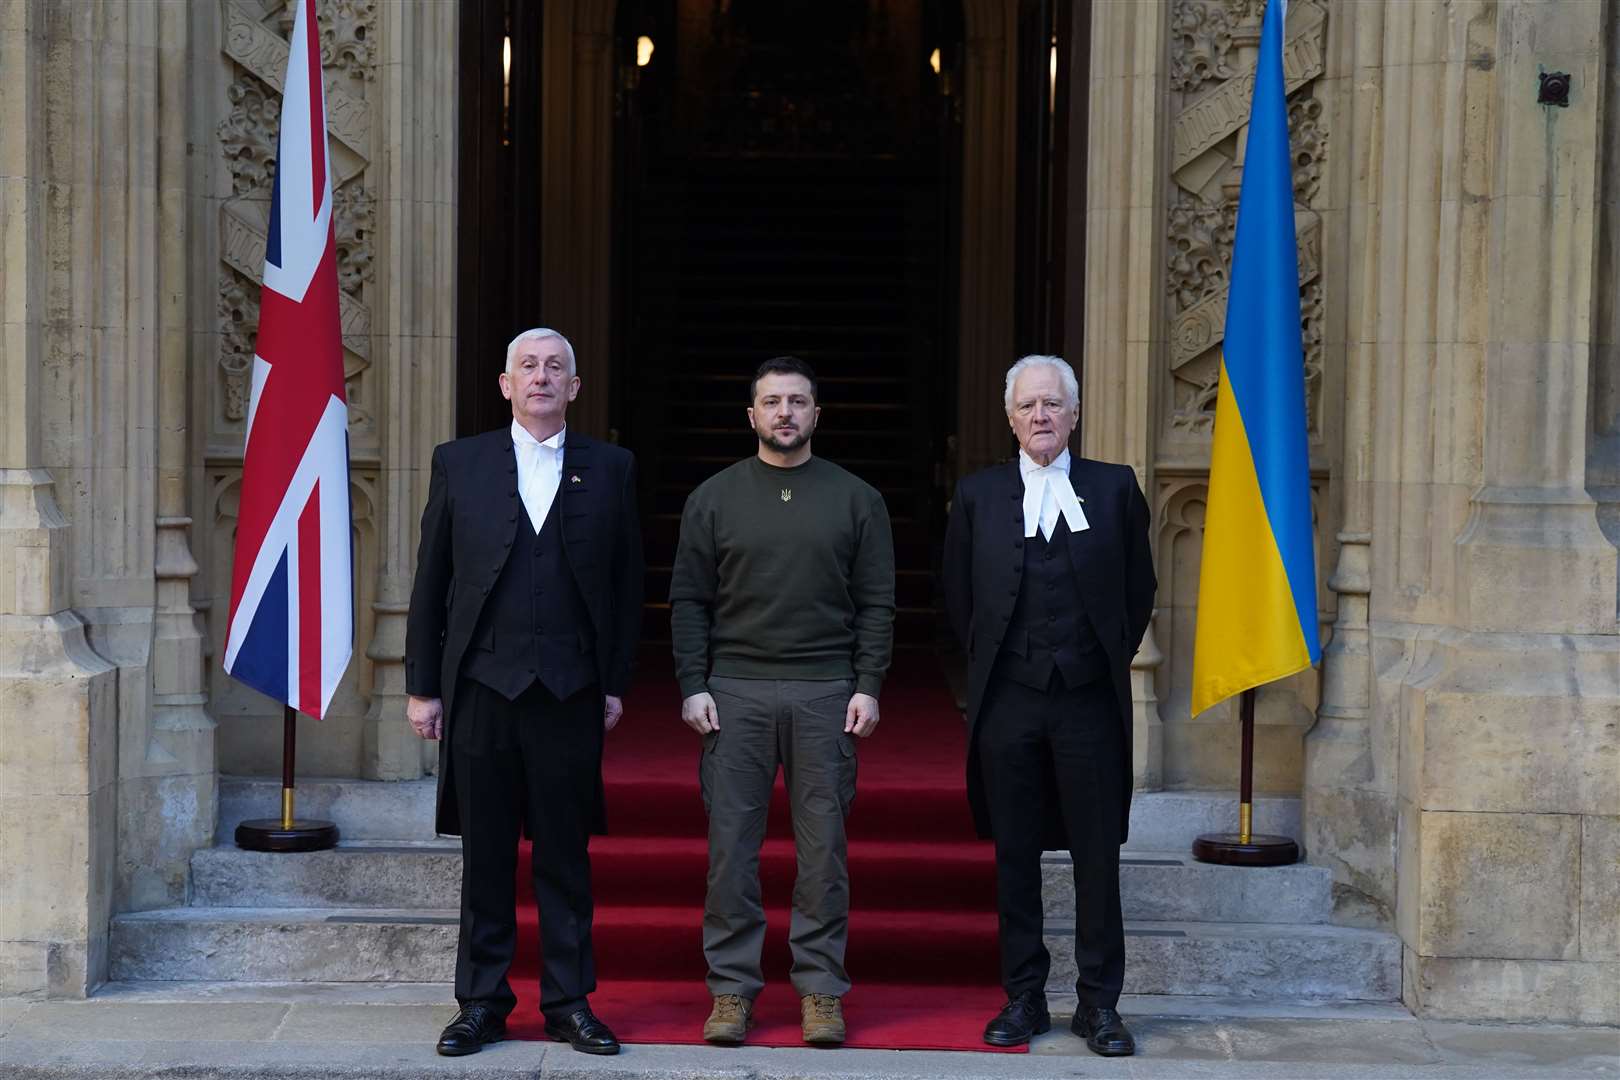 Sir Lindsay Hoyle and Speaker of the House of Lords Lord McFall welcome Ukrainian President Volodymyr Zelensky to Westminster Hall (Stefan Rousseau/PA)